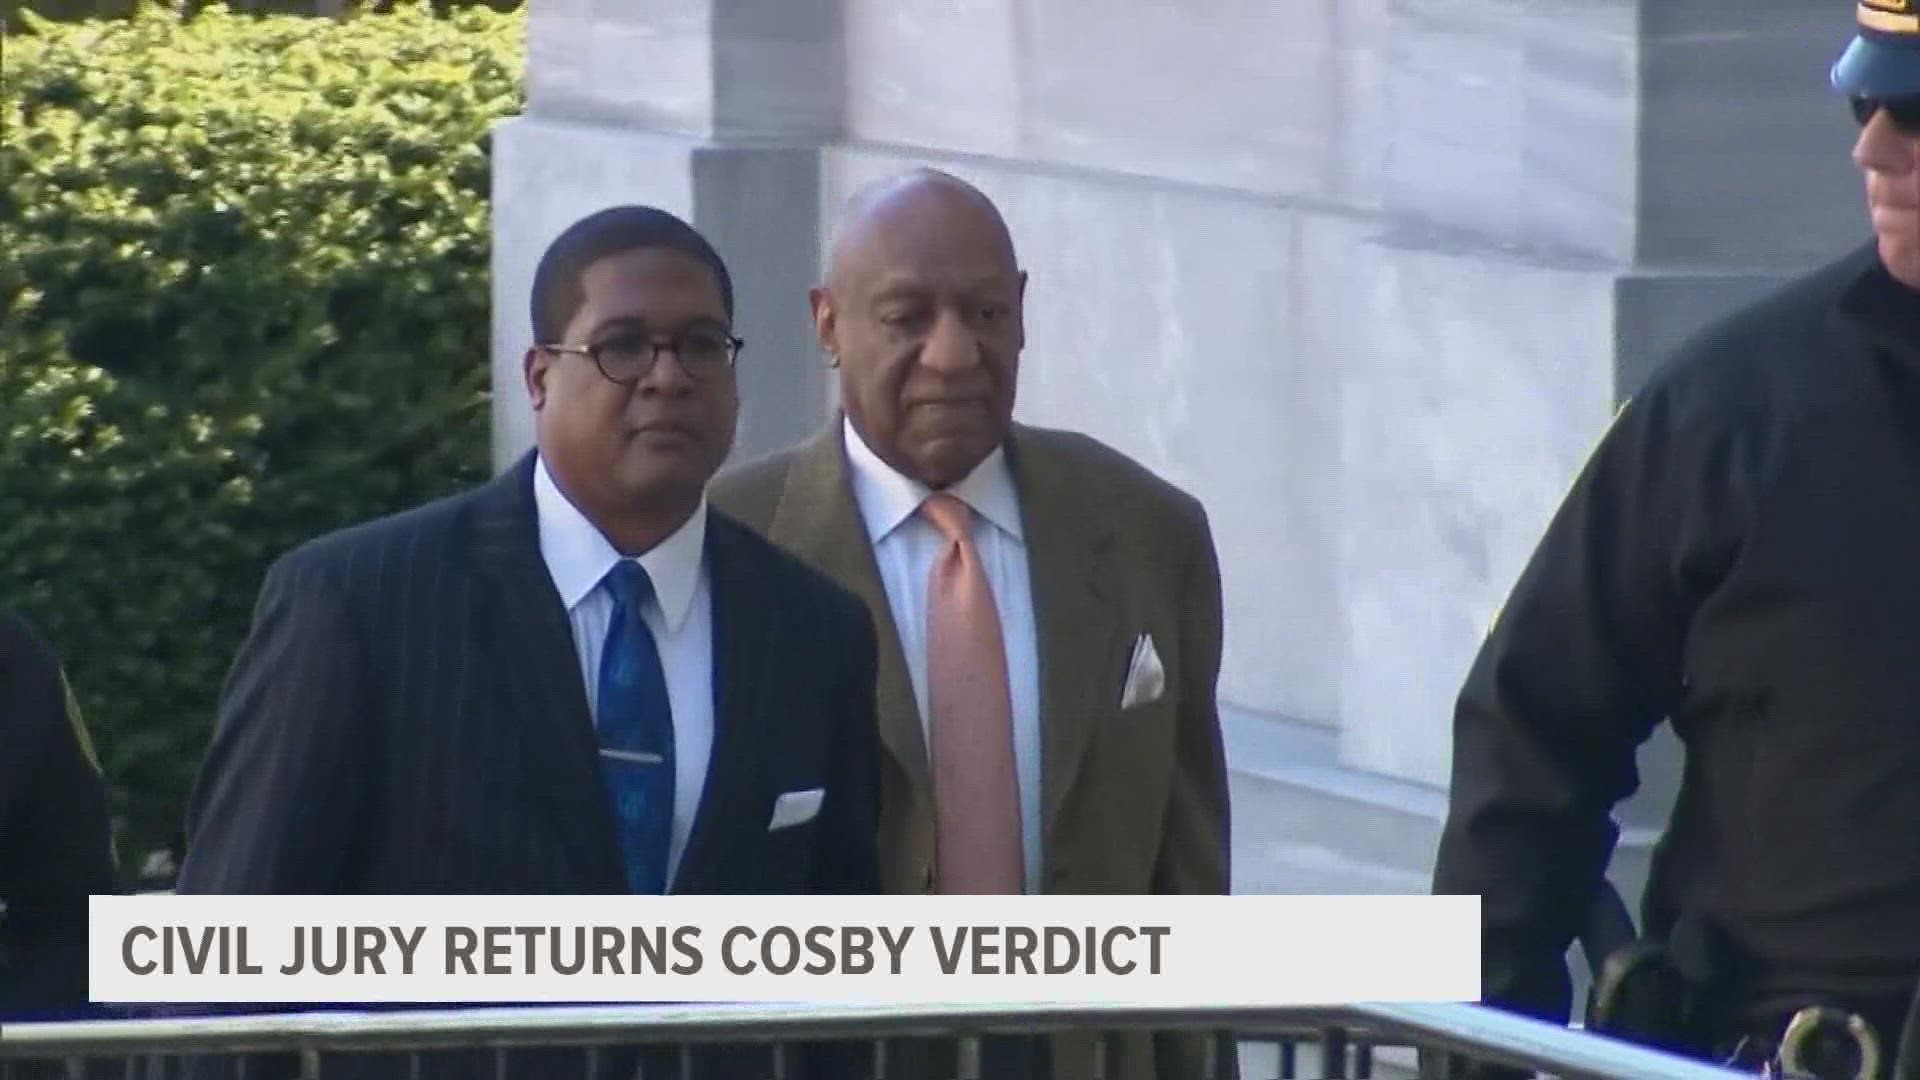 Cosby continues to deny the allegations.